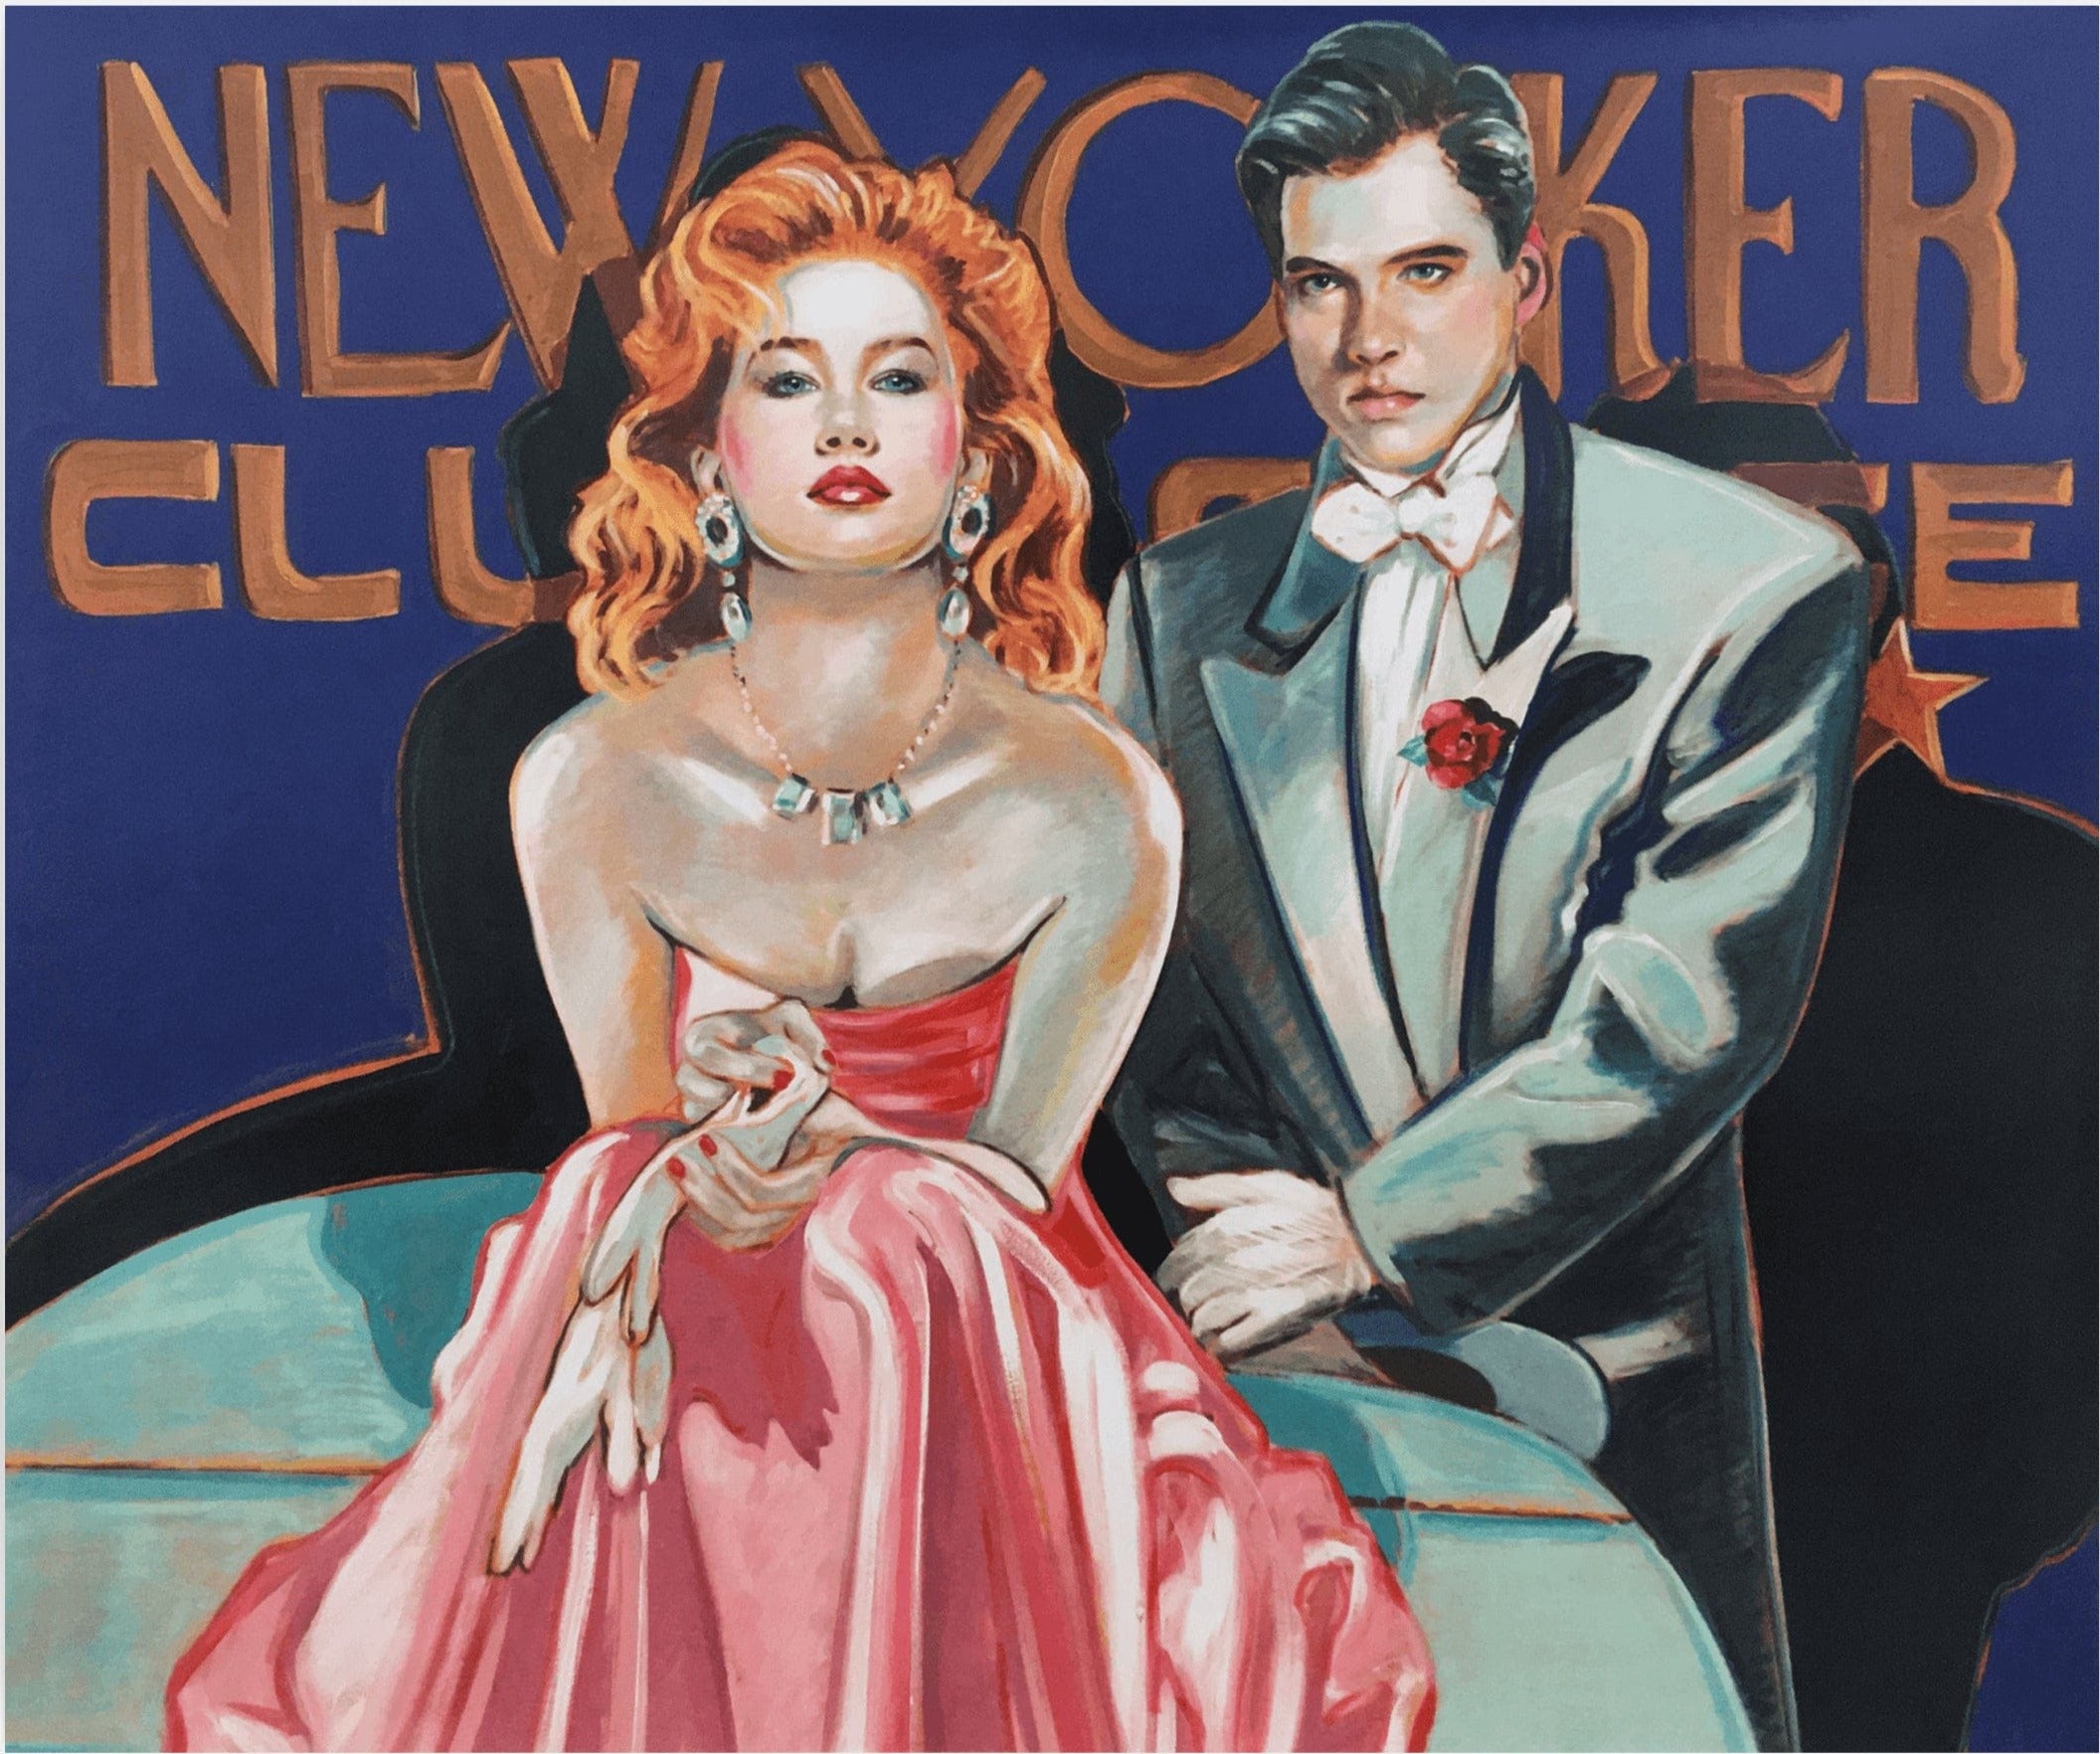 Colleen Ross Fine Art Gallery Limited Edition Serigraph New Yorker Club, 1988